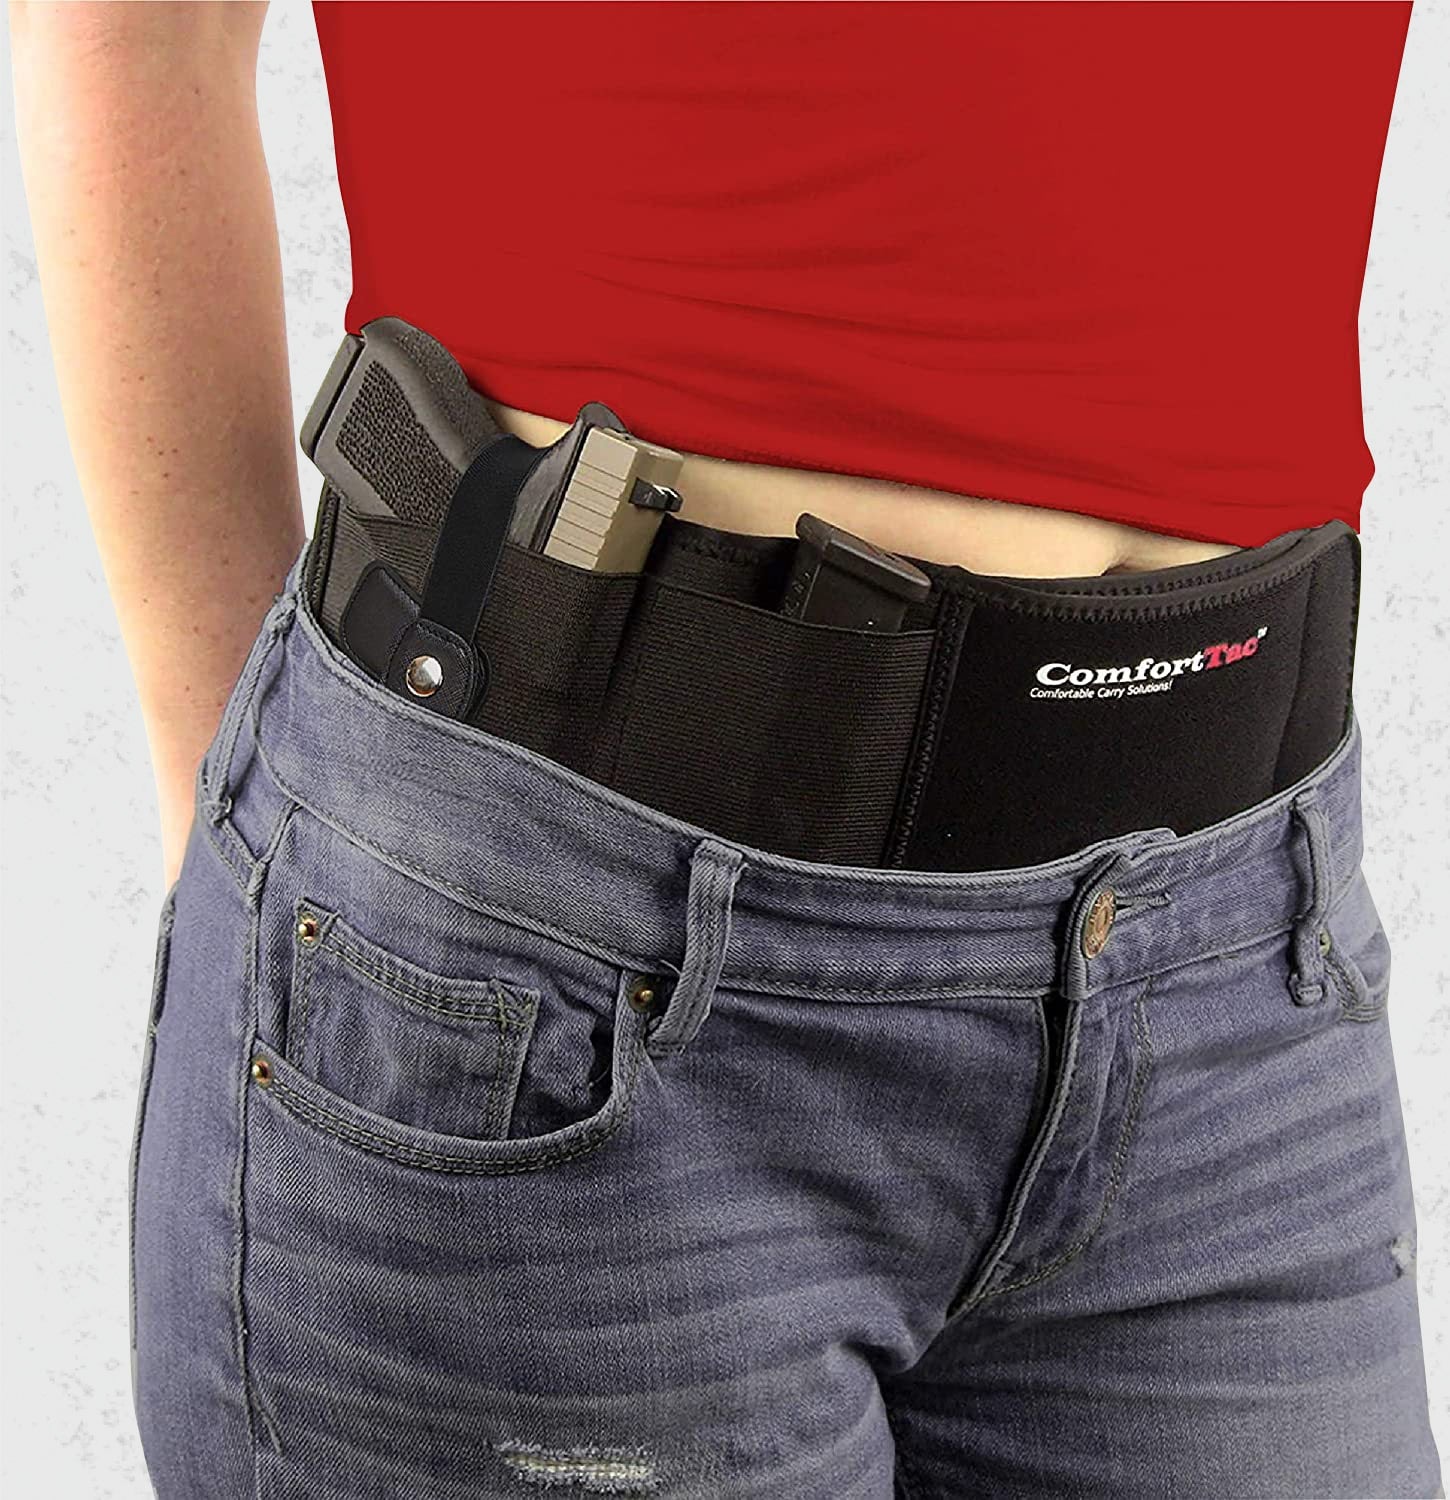 How To Wear The Low-Pro Belly Band Holster by Alien Gear Holsters